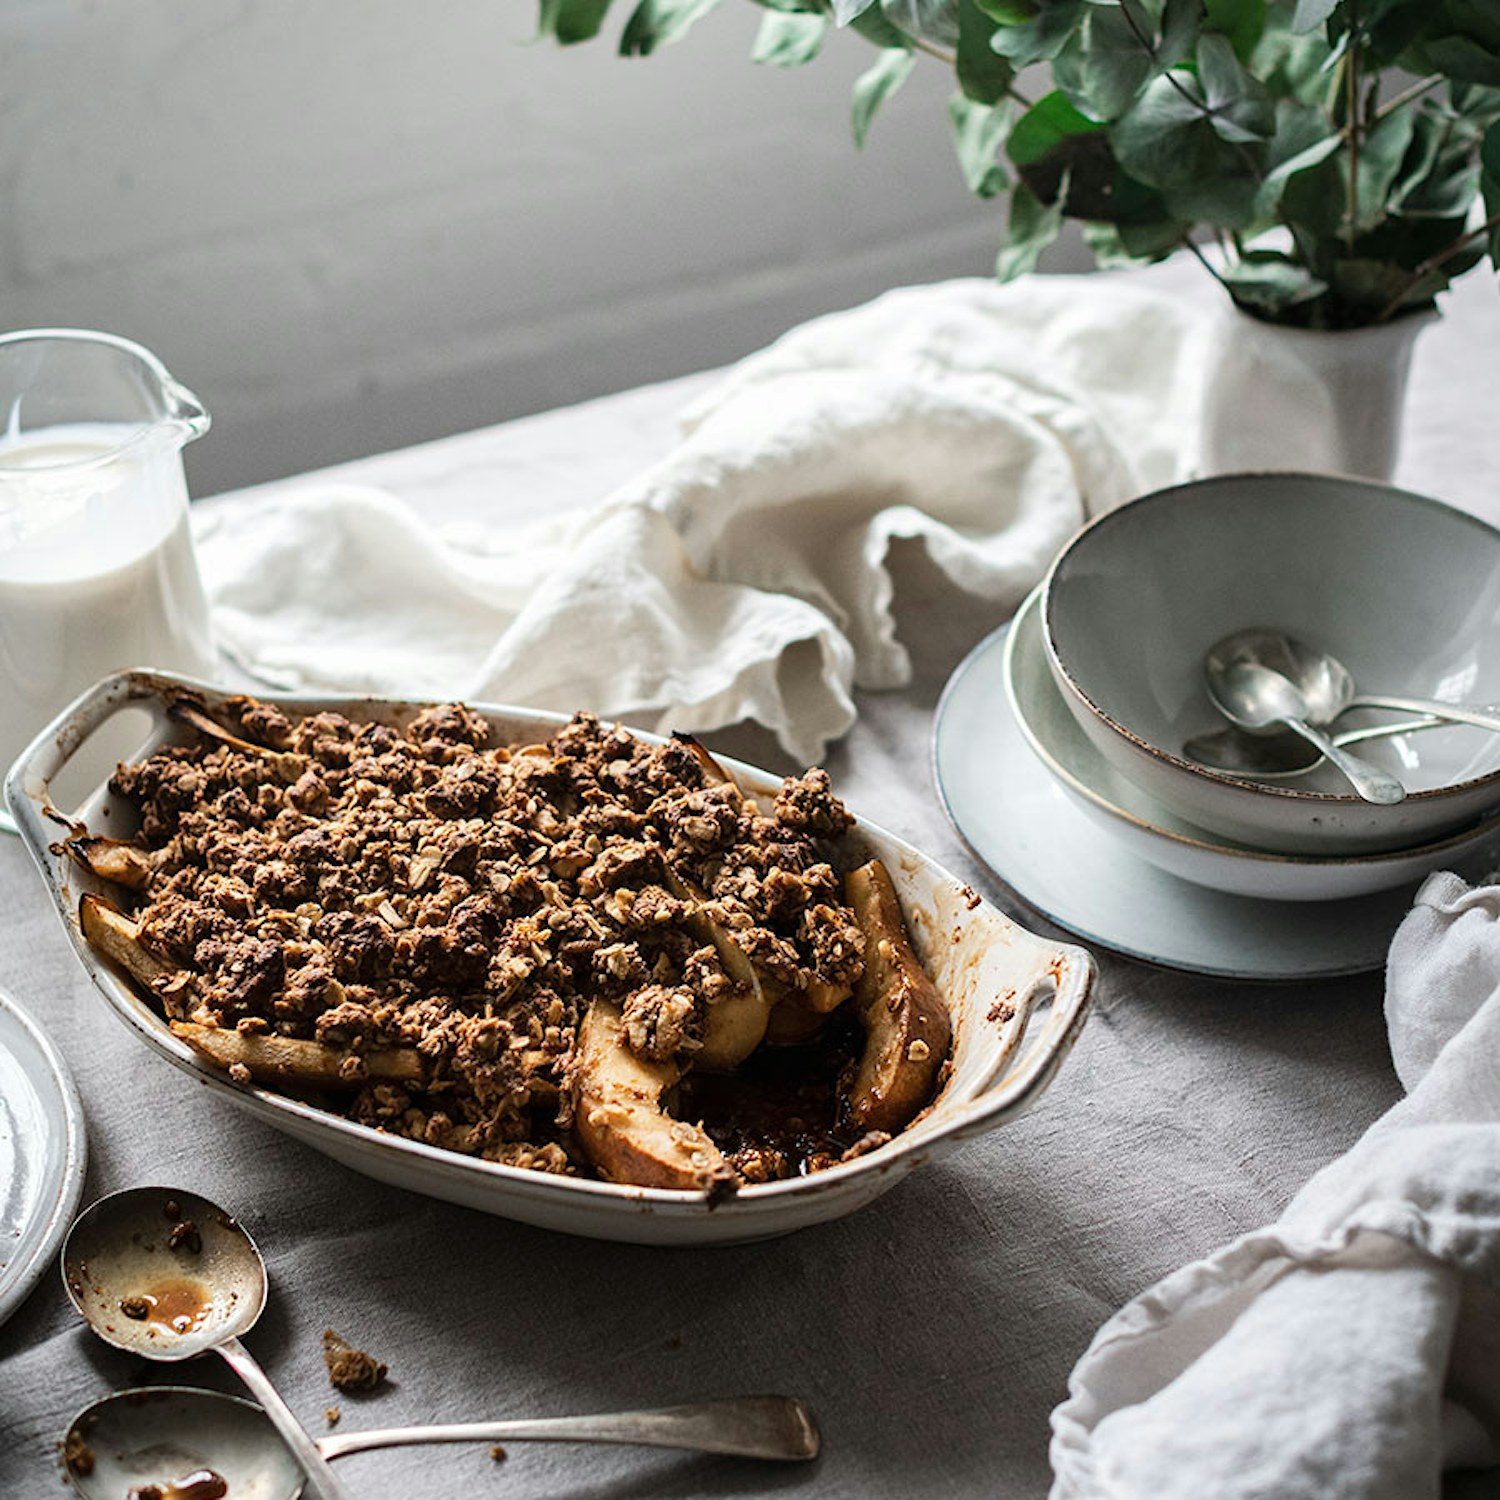 Spiced pear and walnut crumble